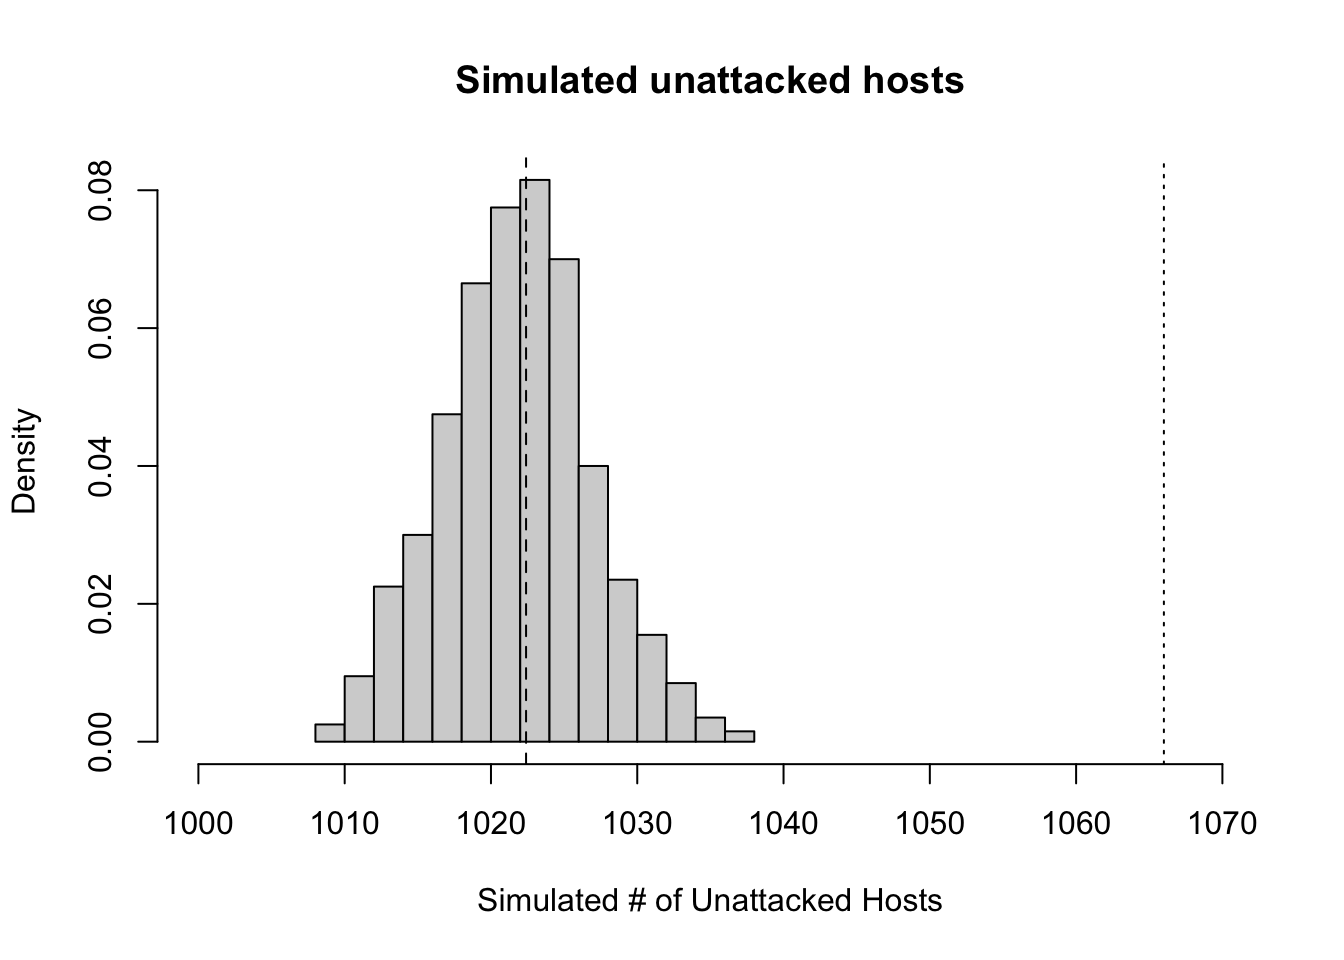 Histogram of simulated host populations, assuming a attacks on hosts are random and independent of each other. The dashed line in the histogram is the expected number of unattacked hosts with random and independent attacxks, whereas the dotted line to the right is the observed number.